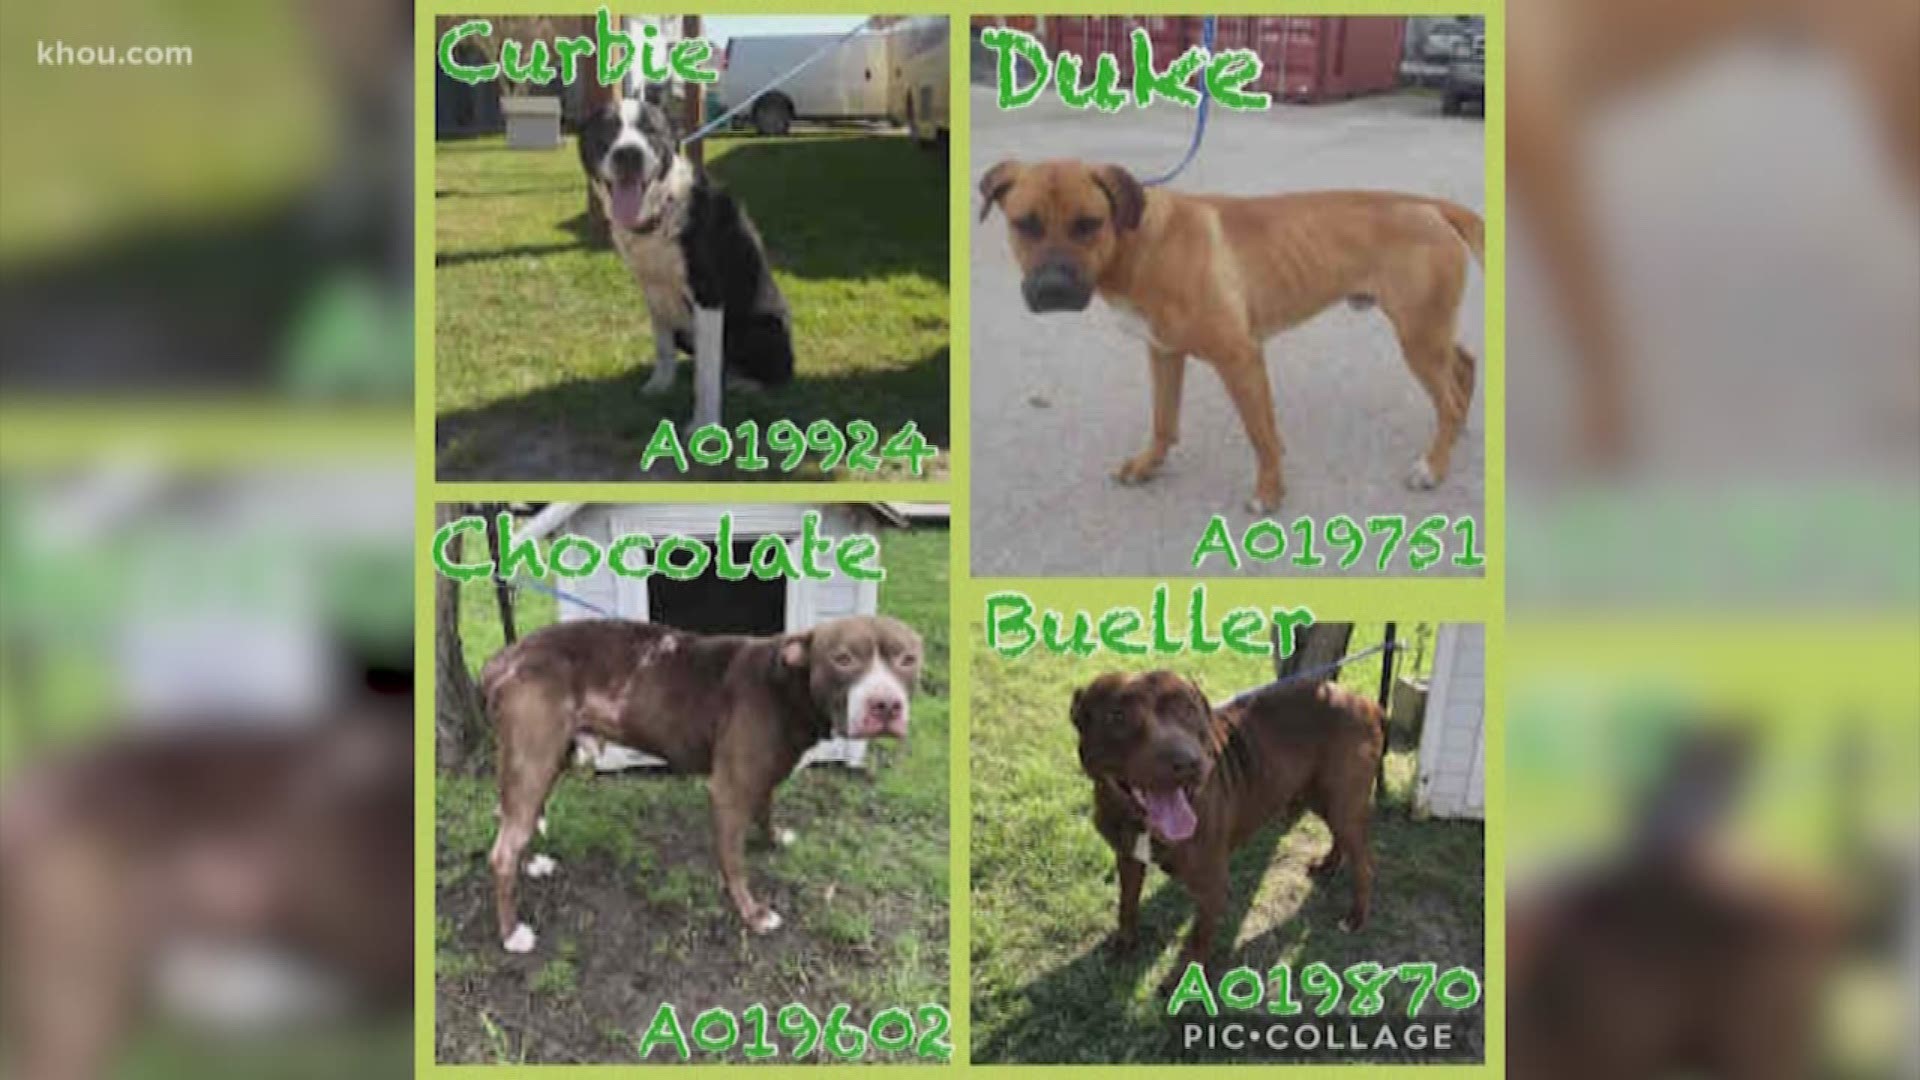 The Fort Bend County animal shelter needs your help! The shelter says they recently received many dogs and they are completely out of space.